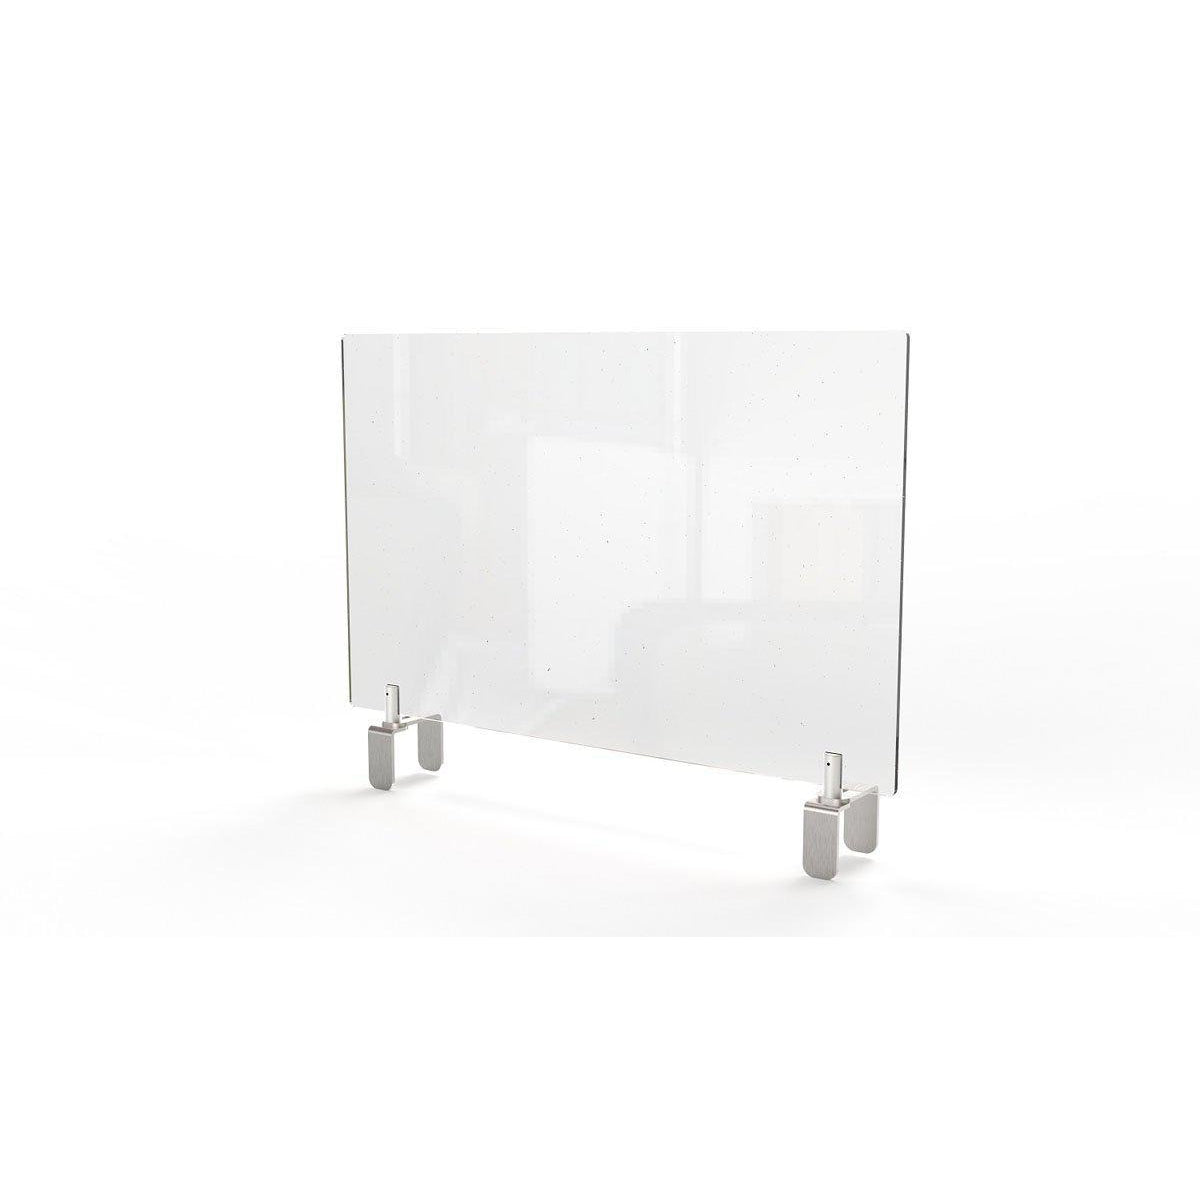 Clear Thermoplastic Partition & Cubicle Extender with Adjustable Clamp Attachment, 24"H x 24"W